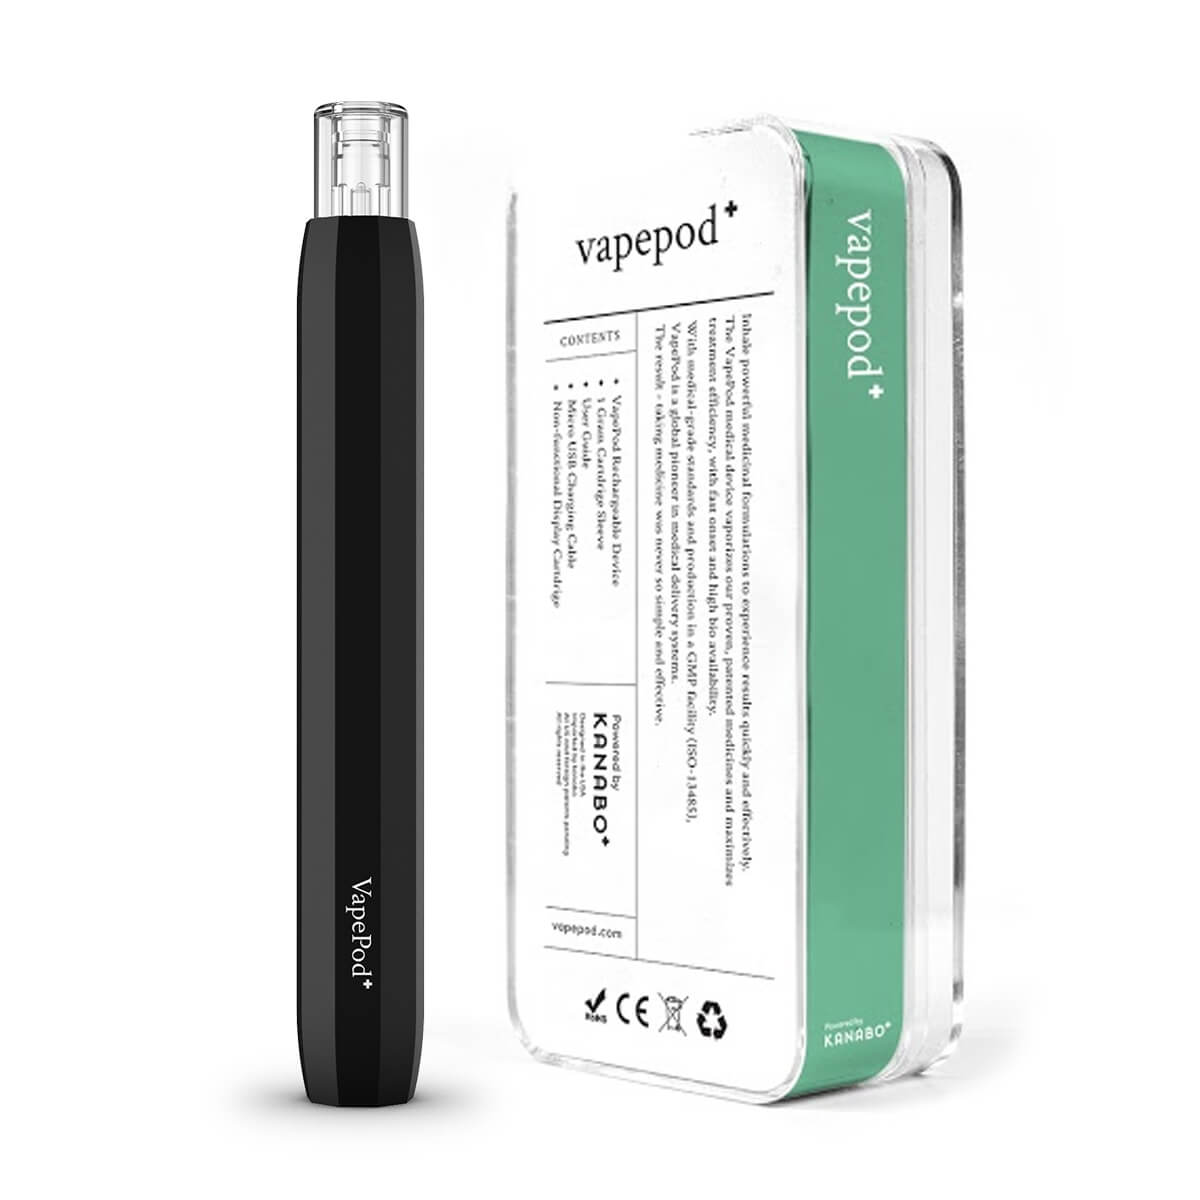 The Kanabo Vapepod Dosage Device (Approved by the Israeli Ministry of Health) now in Cyprus